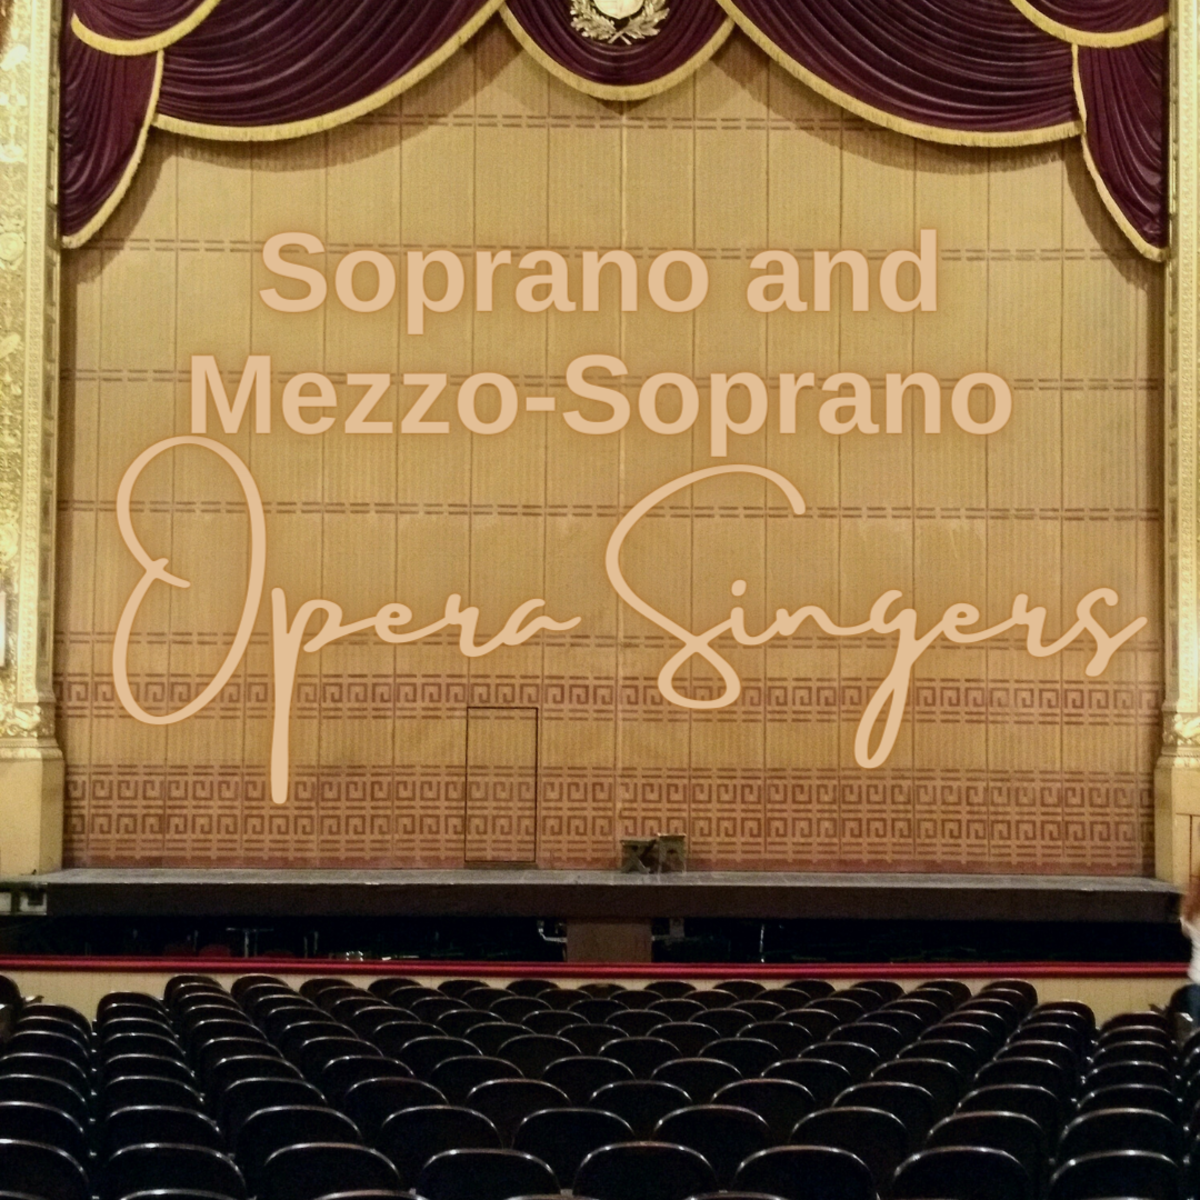 Who are today's top soprano and mezzo-soprano singers? Read on to find out!